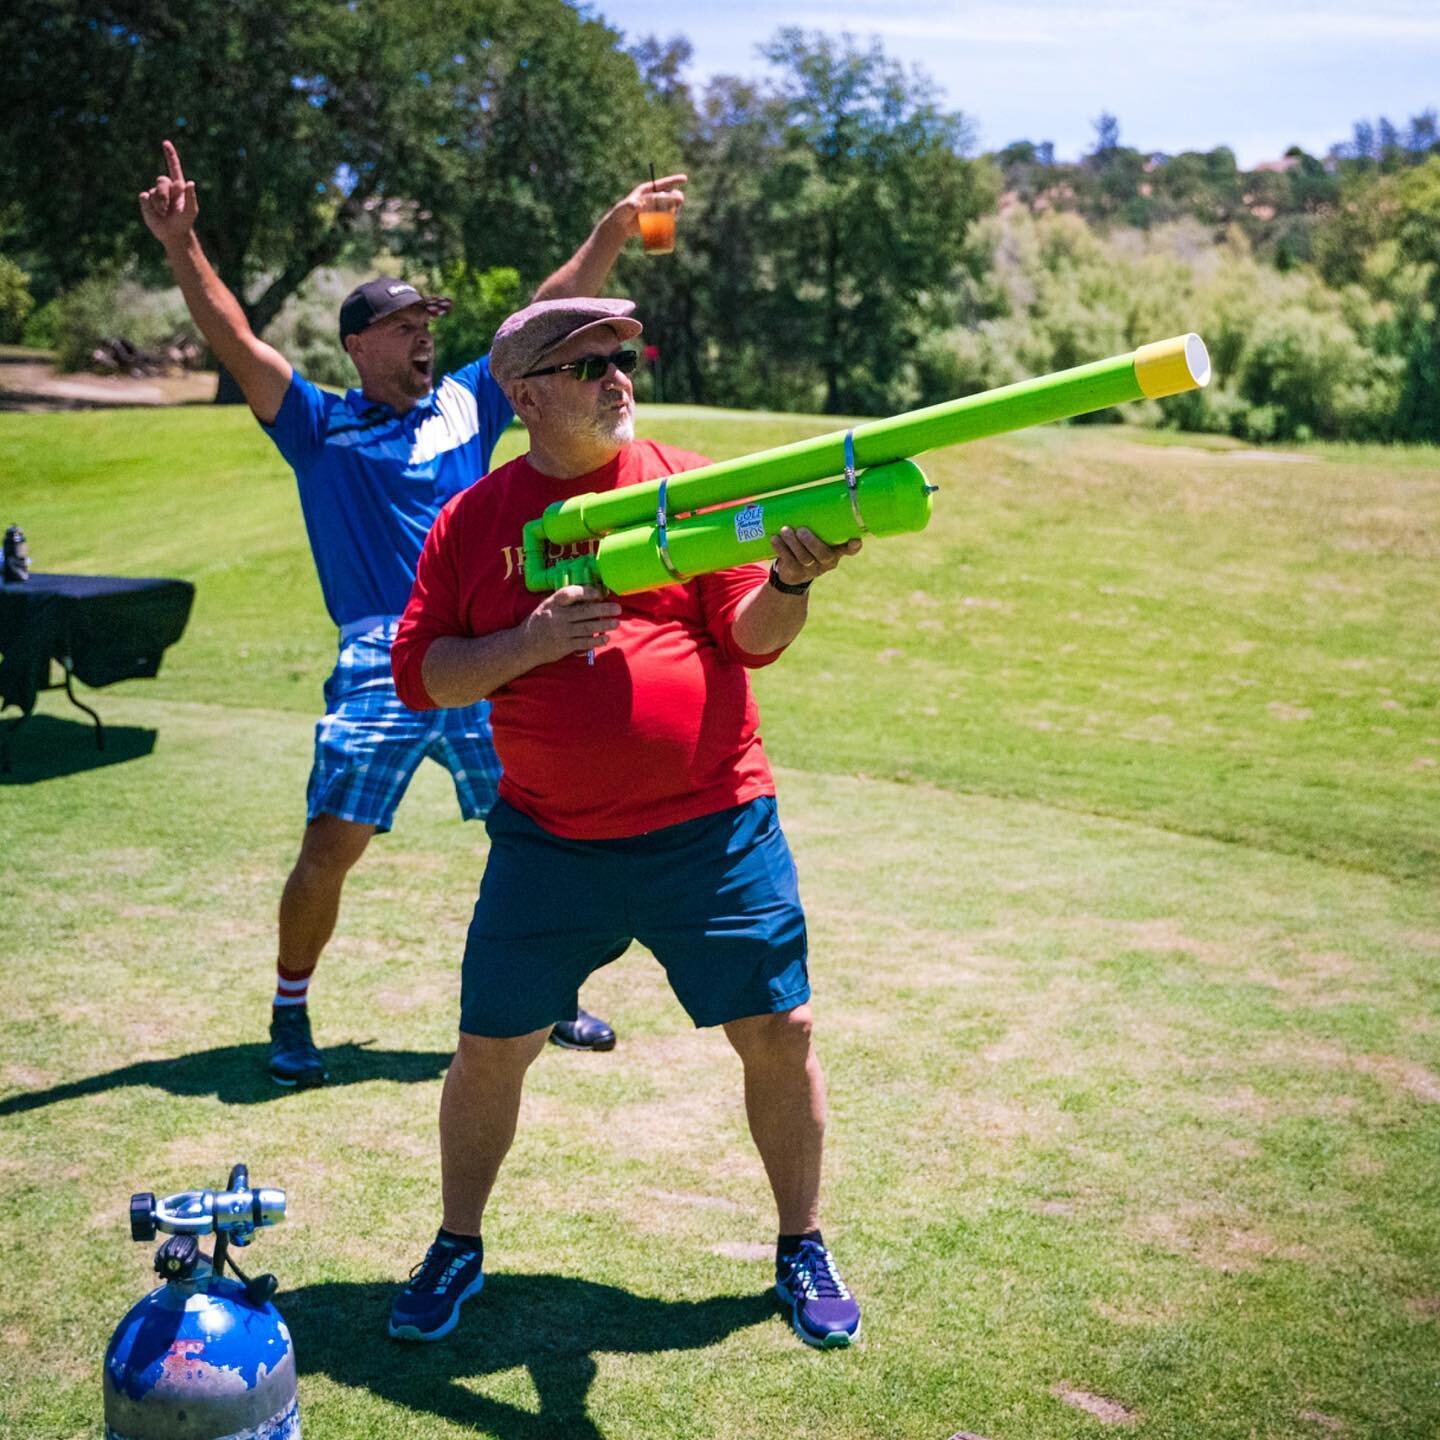 Everyone&rsquo;s favorite: the Golf Ball Launcher #PHFGolfTourney22 #LiveLikePatrick